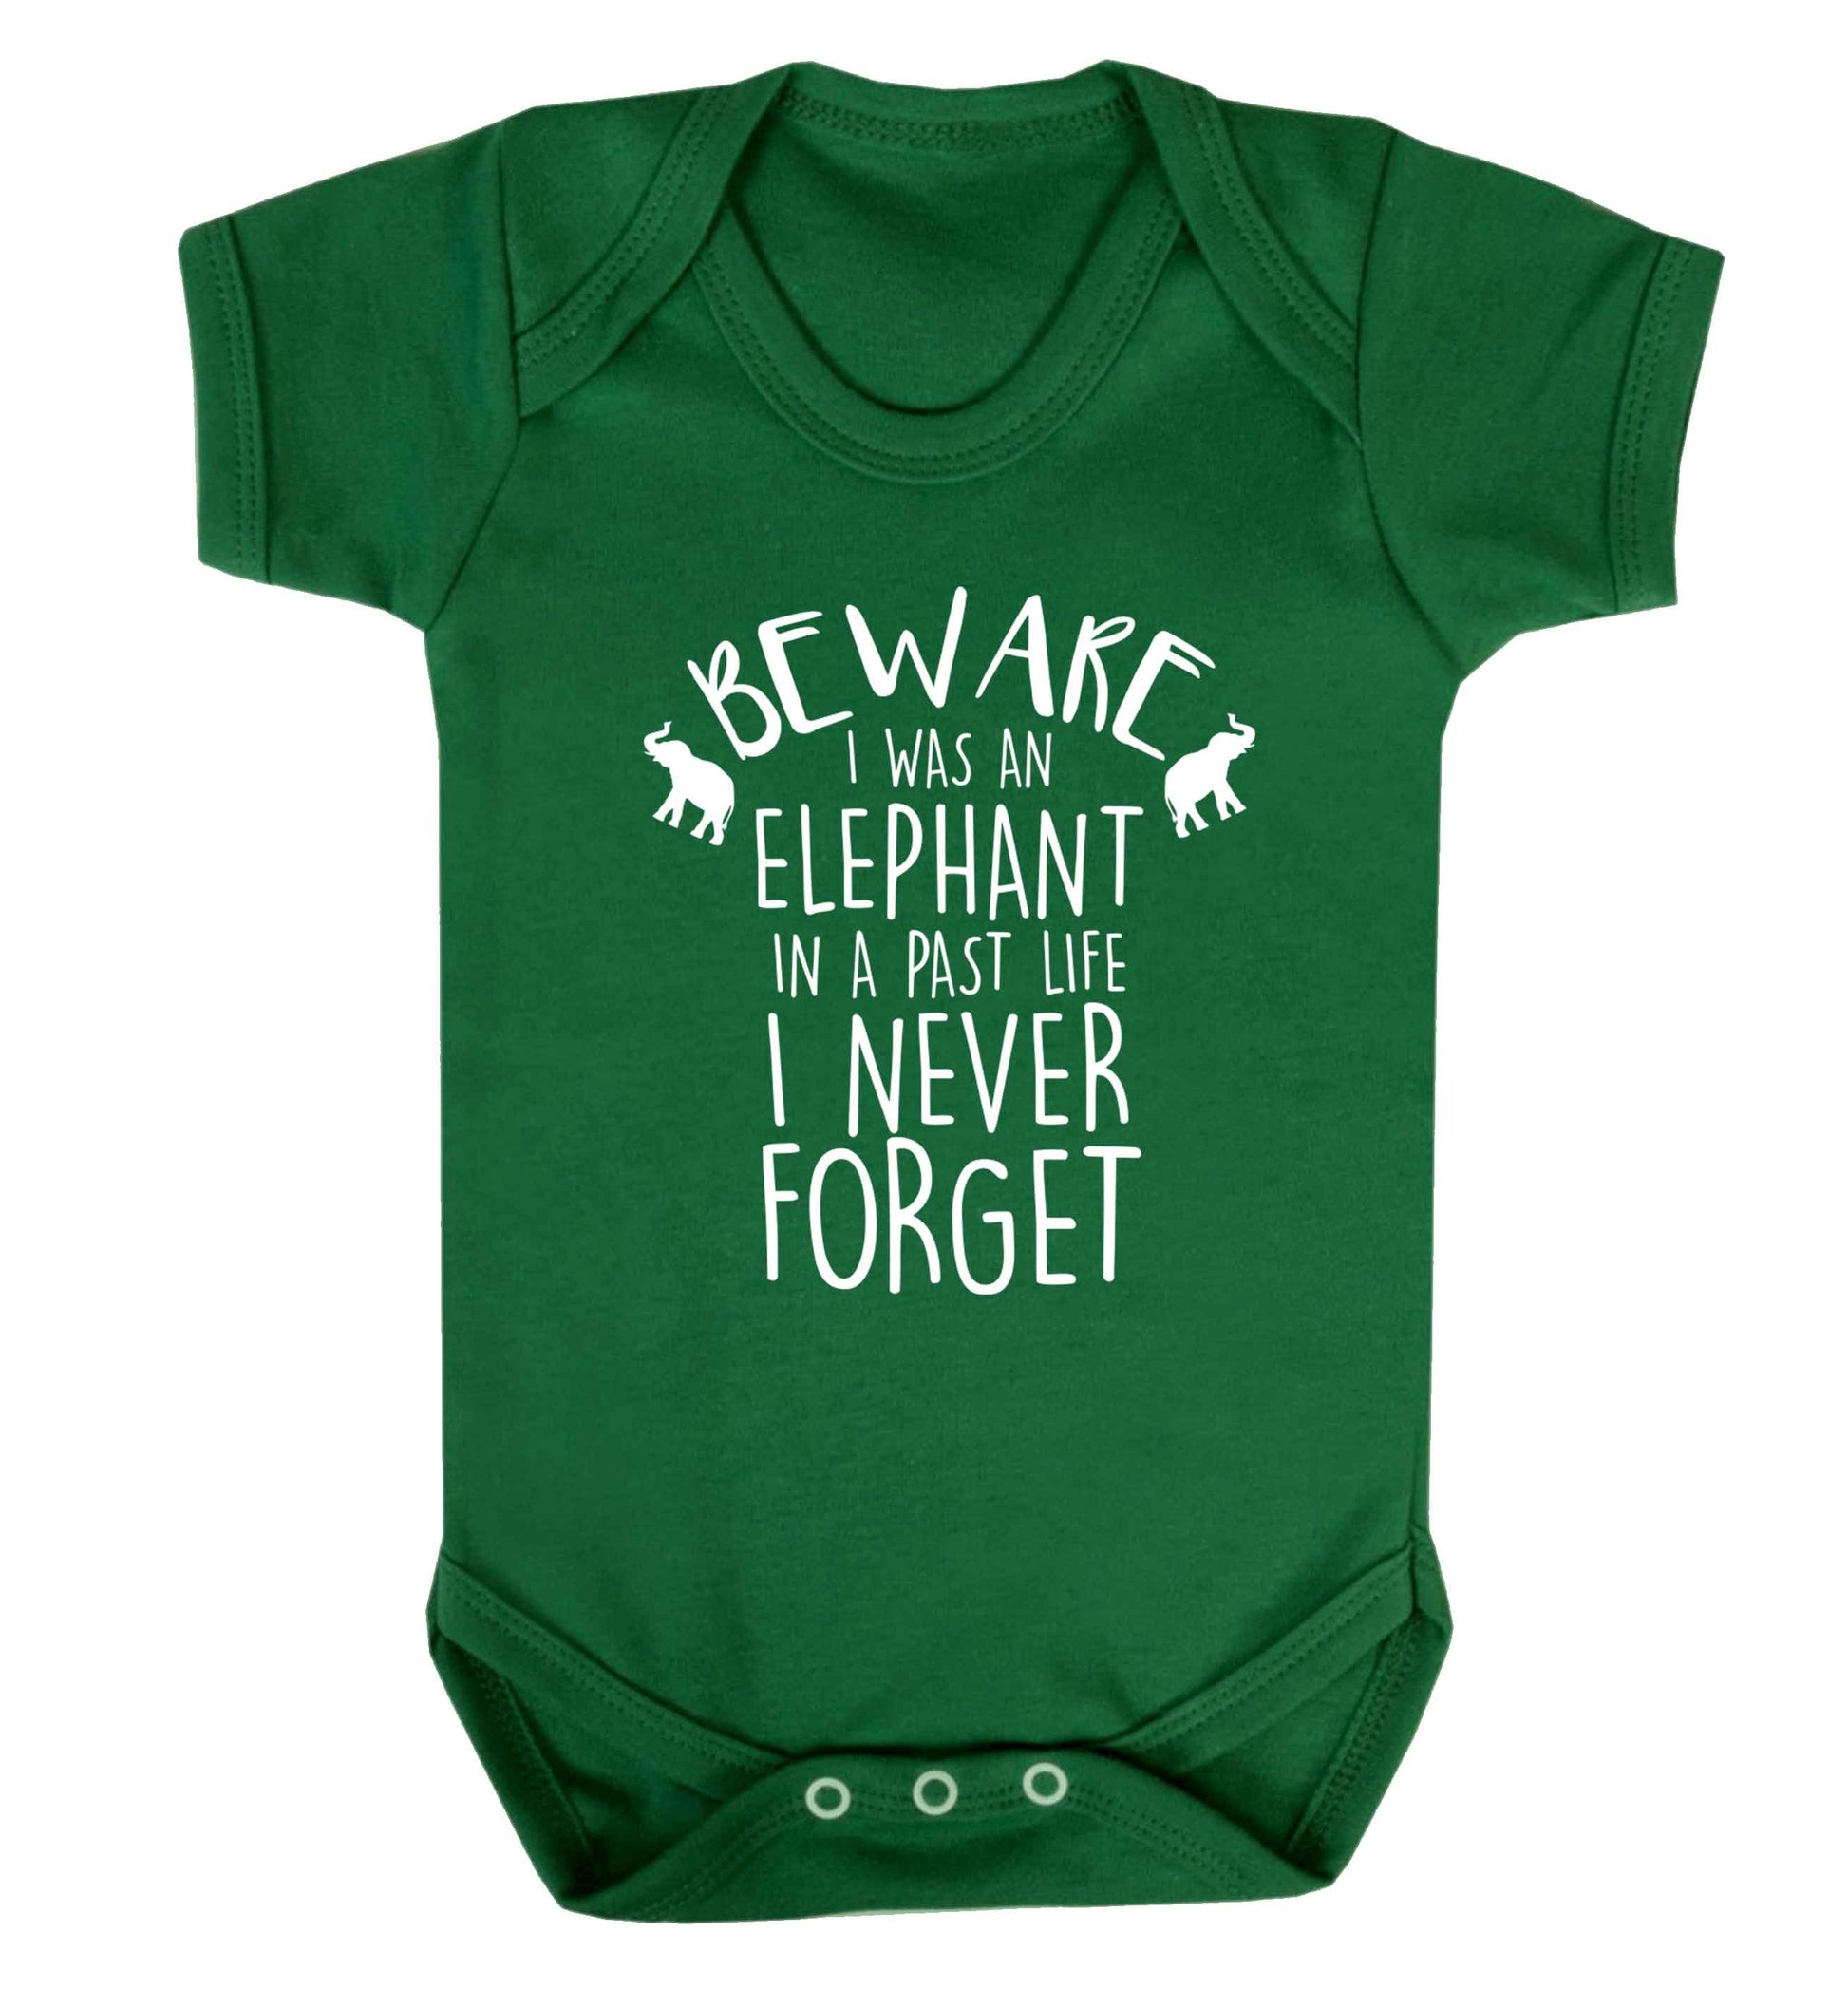 Beware I was an elephant in my past life I never forget Baby Vest green 18-24 months